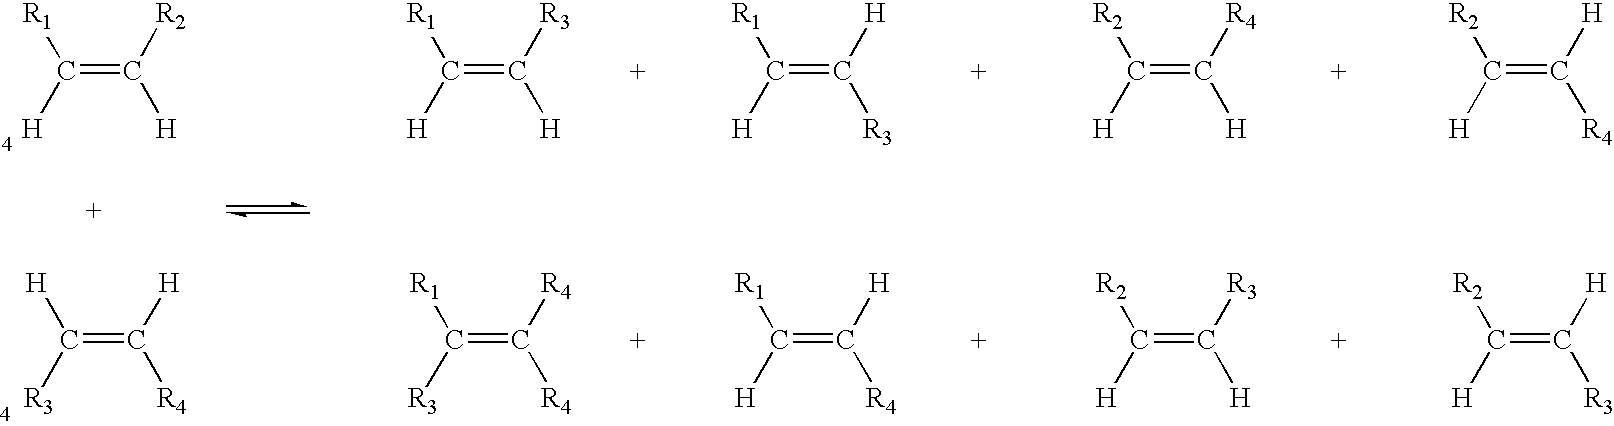 Process for co-producing olefins and esters by ethenolysis of unsaturated fats in non-aqueous ionic liquids